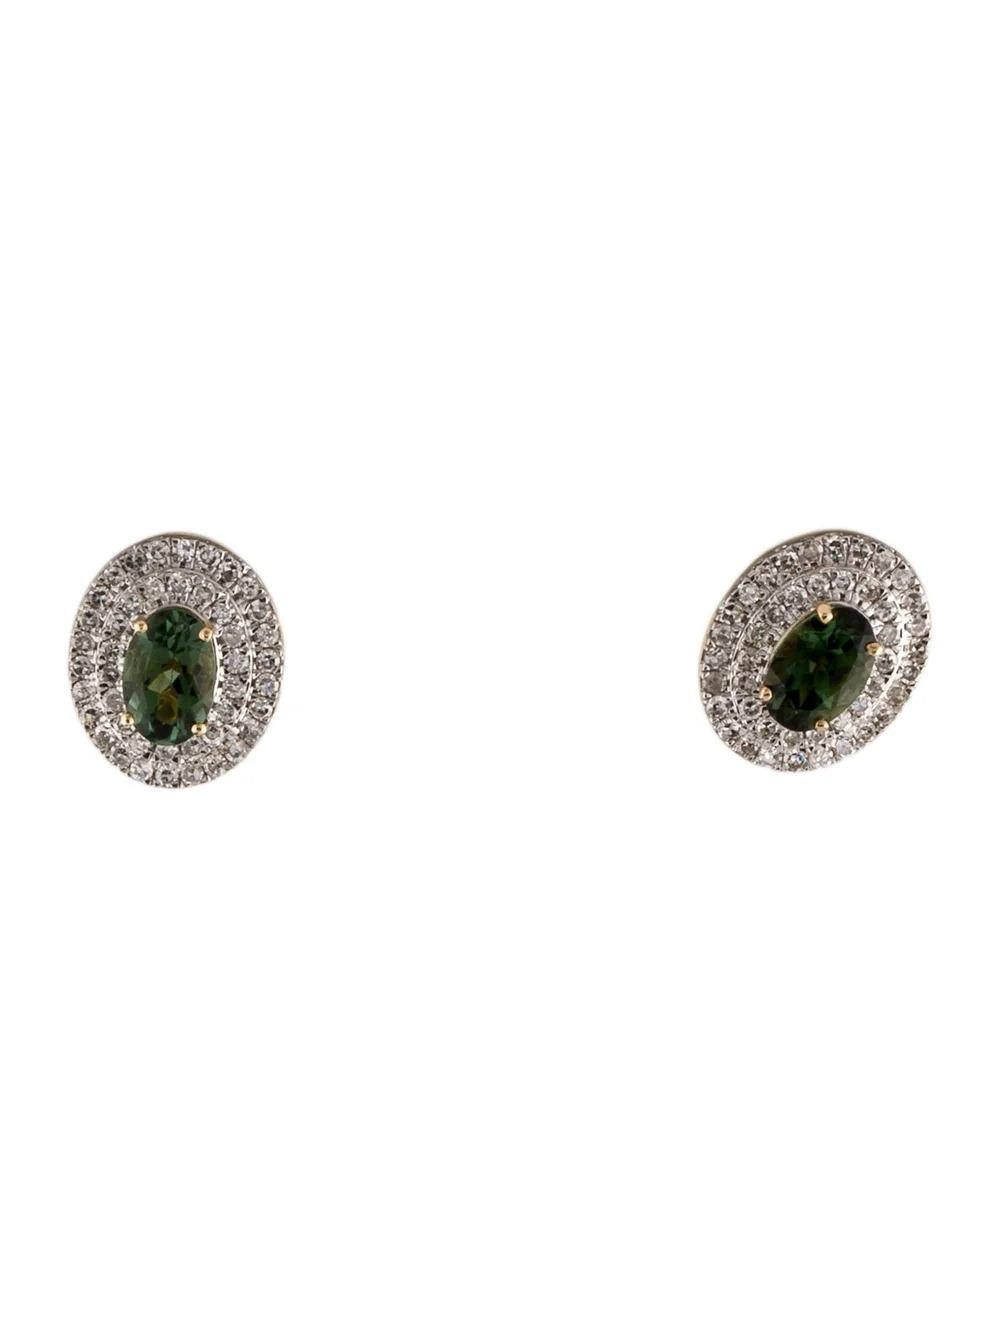 Experience timeless elegance with these exquisite 14K White Gold & 14K Yellow Gold earrings featuring a stunning 0.98 Carat Oval Modified Brilliant Tourmaline paired with sparkling Diamonds. Crafted to perfection, these earrings exude luxury and